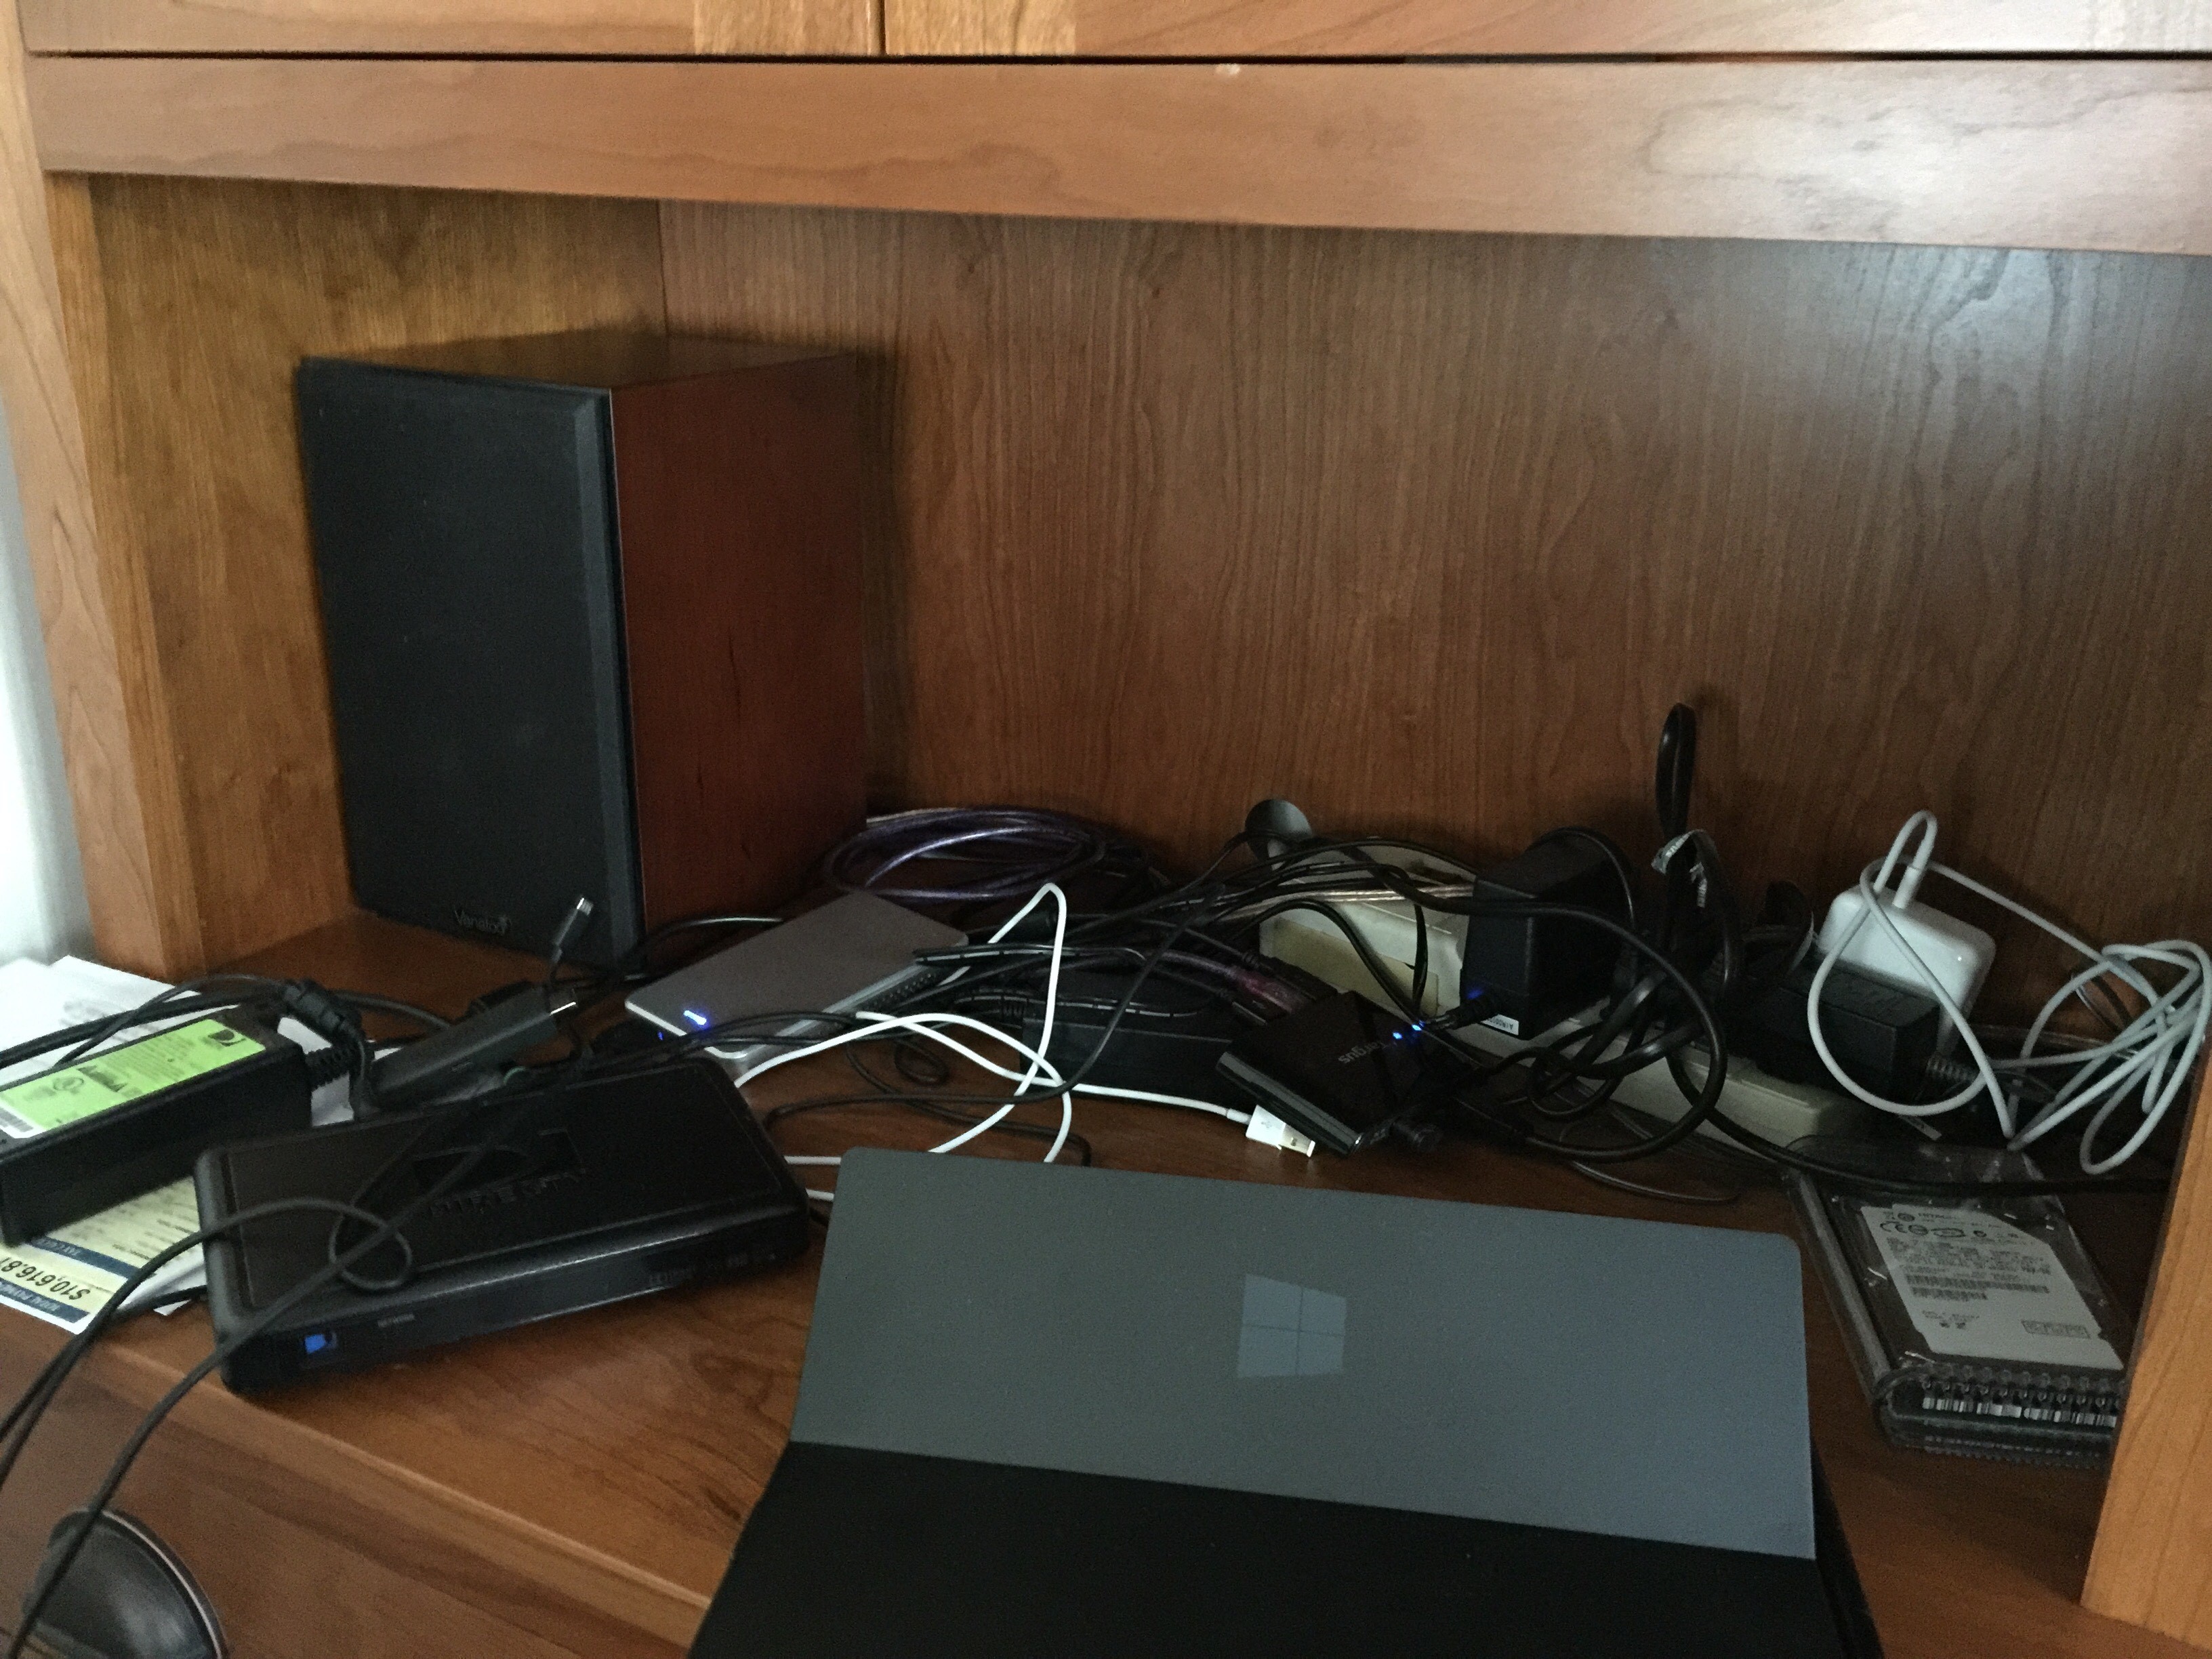 Any suggestions on hiding/managing these cables under my desk? : r